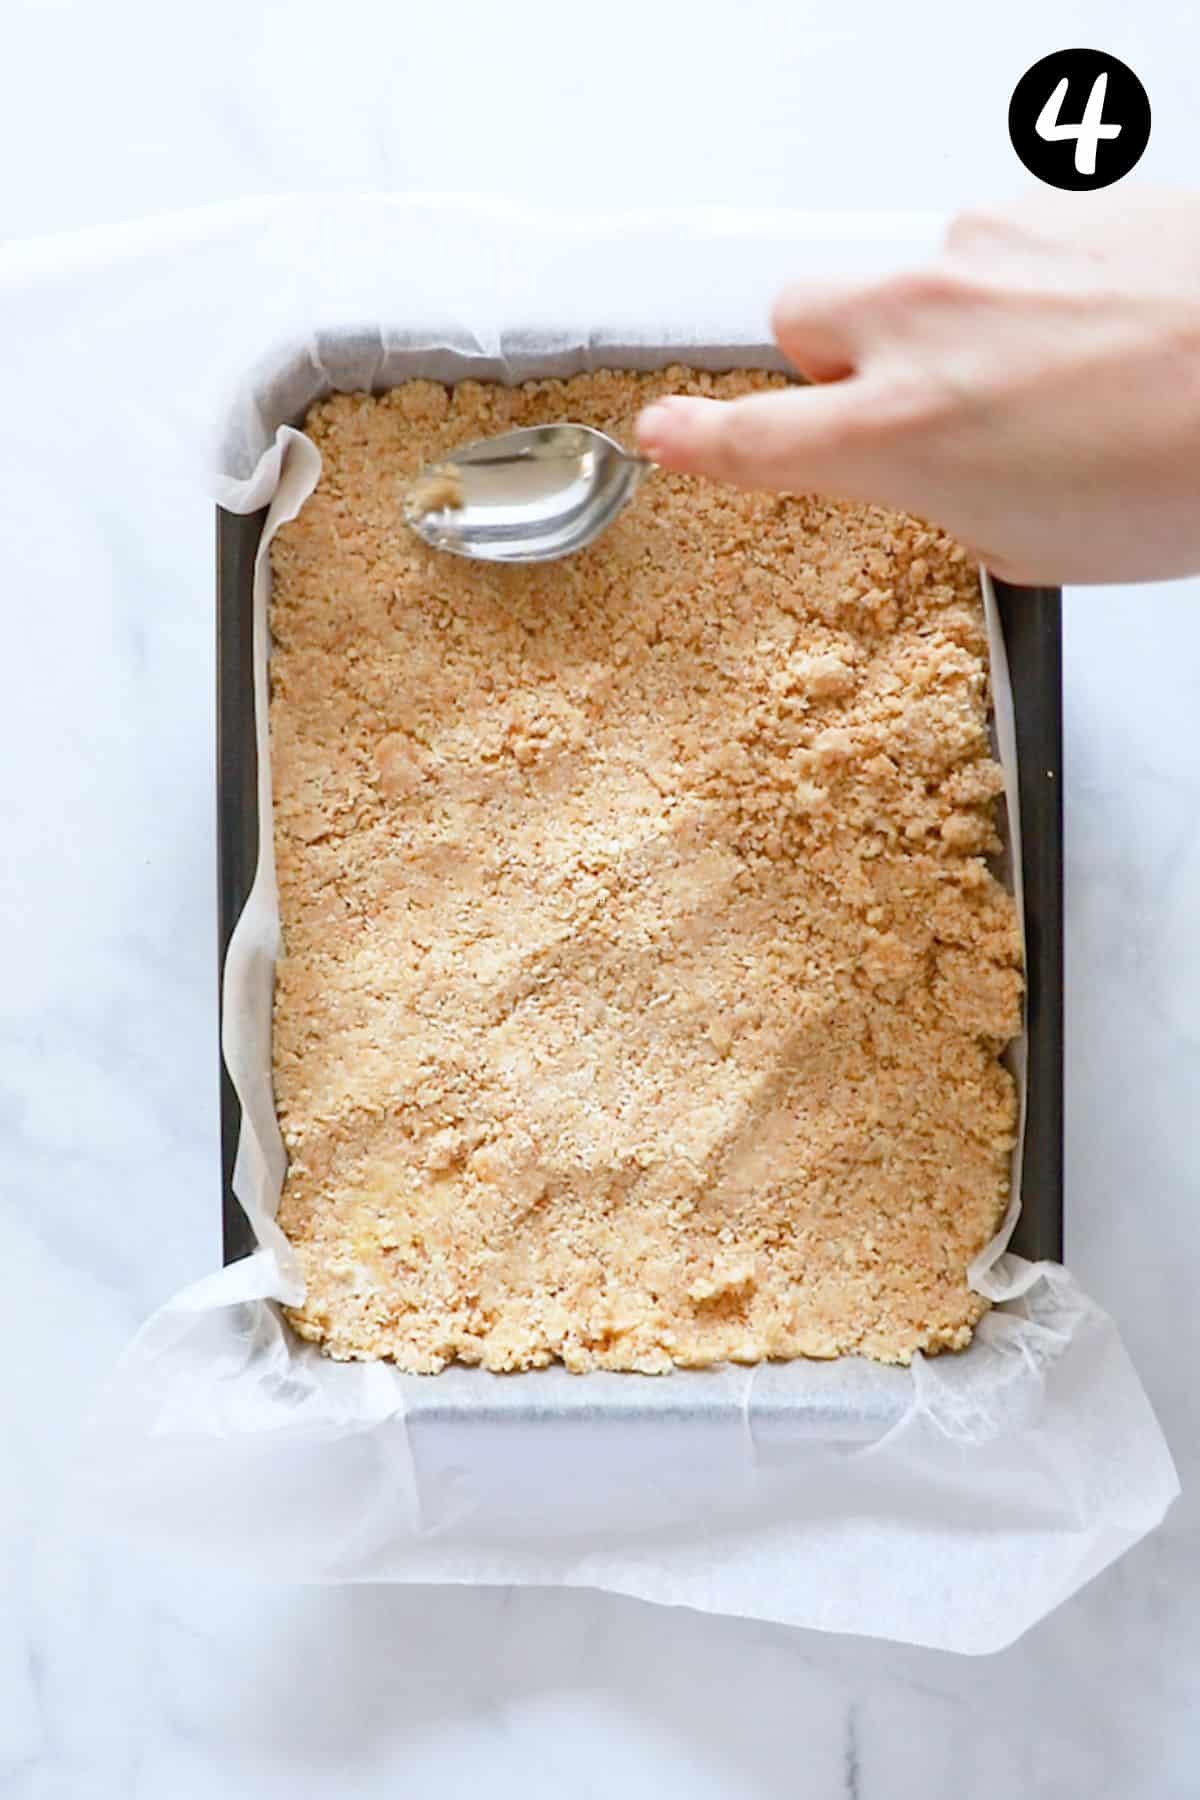 a hand pressing a spoon onto the top of slice mixture in a baking tin.